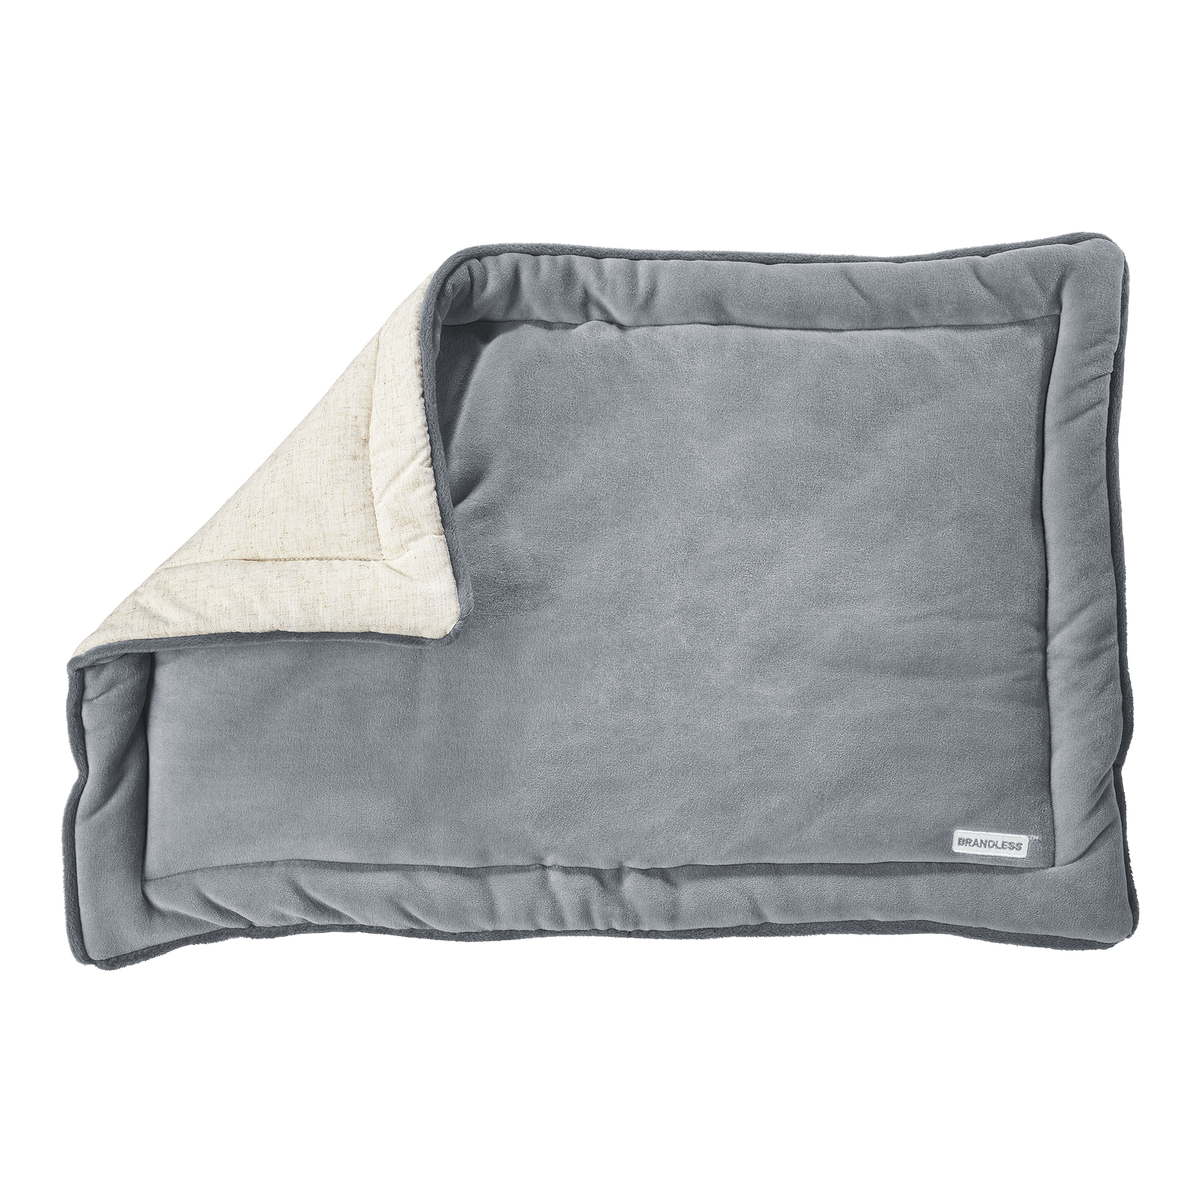 Top view, corner folded up showing the natural cotton colored underside and the gray top of the pet mat.